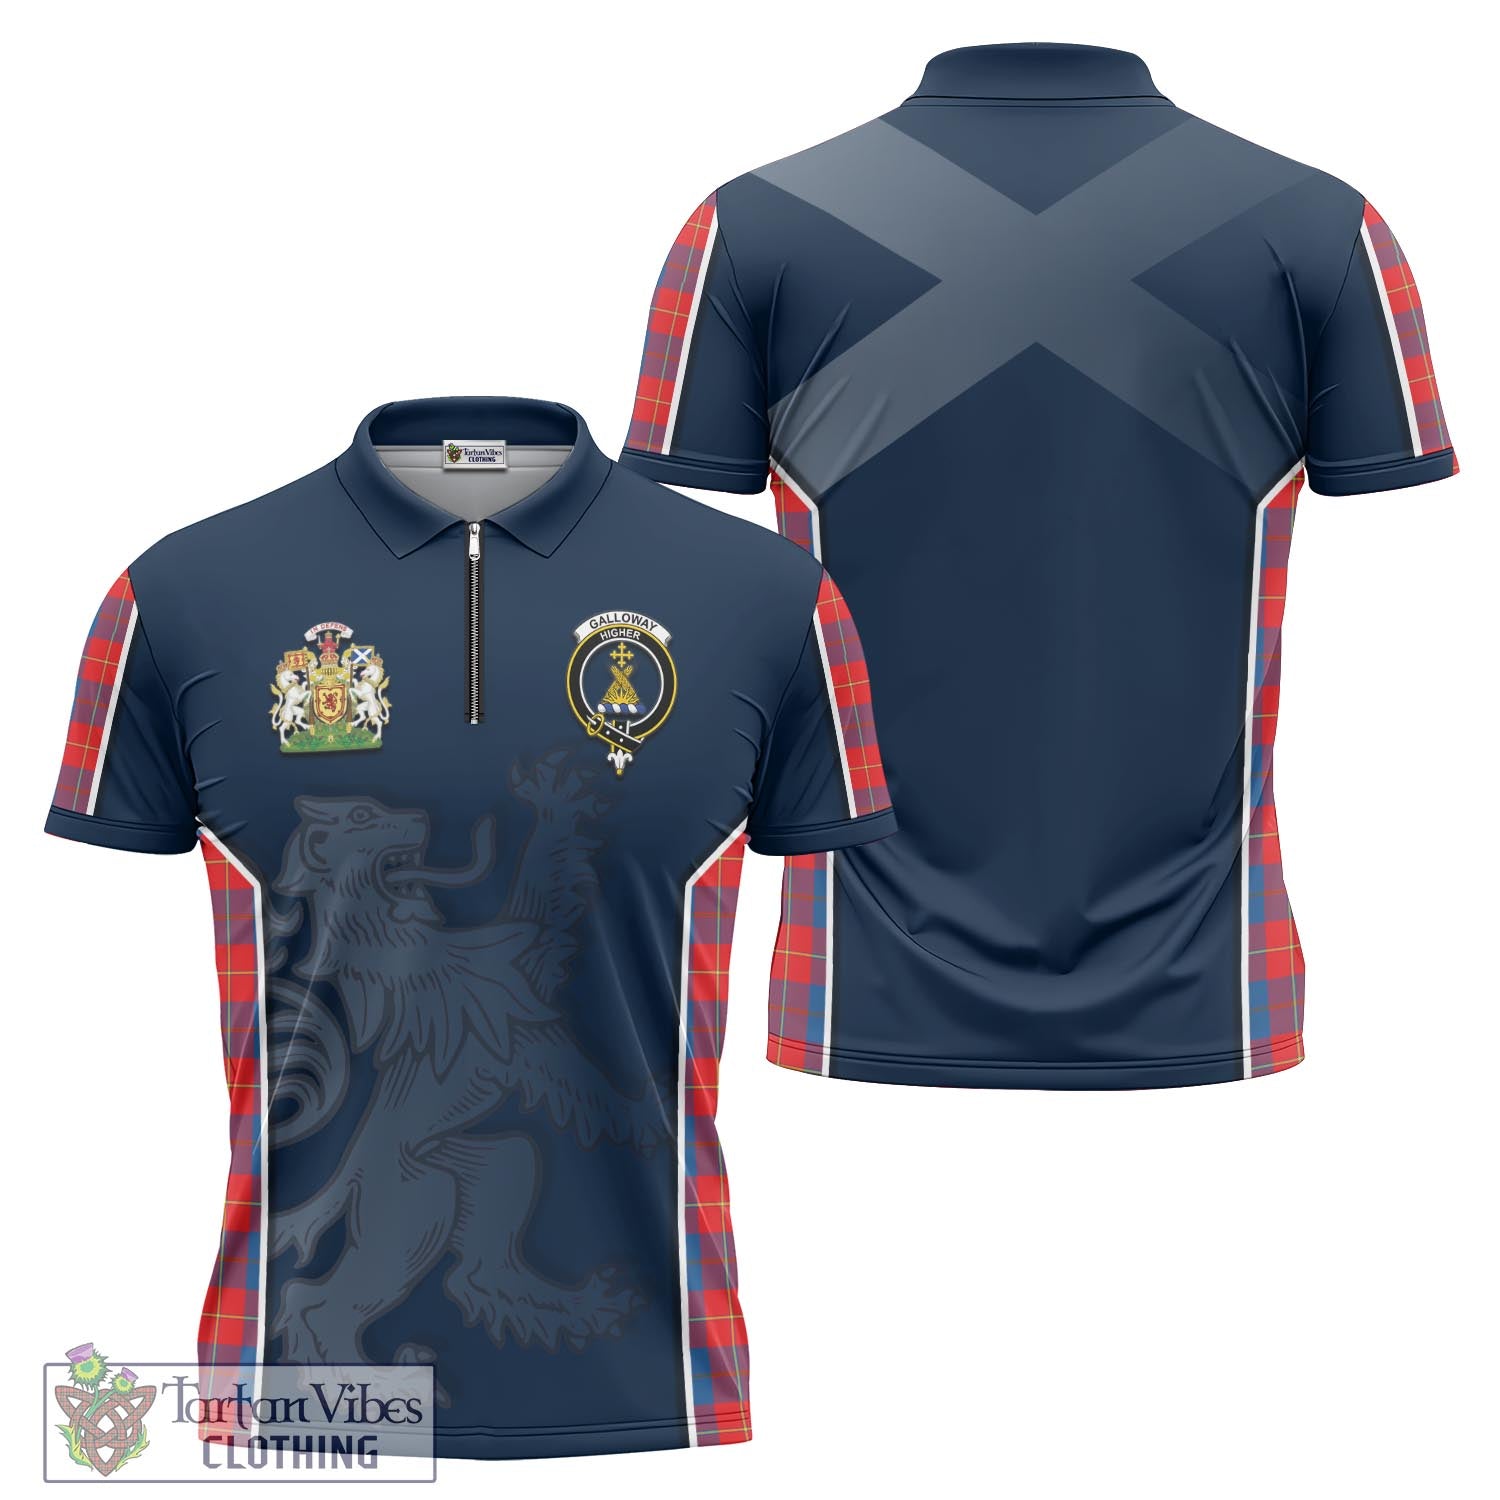 Tartan Vibes Clothing Galloway Red Tartan Zipper Polo Shirt with Family Crest and Lion Rampant Vibes Sport Style